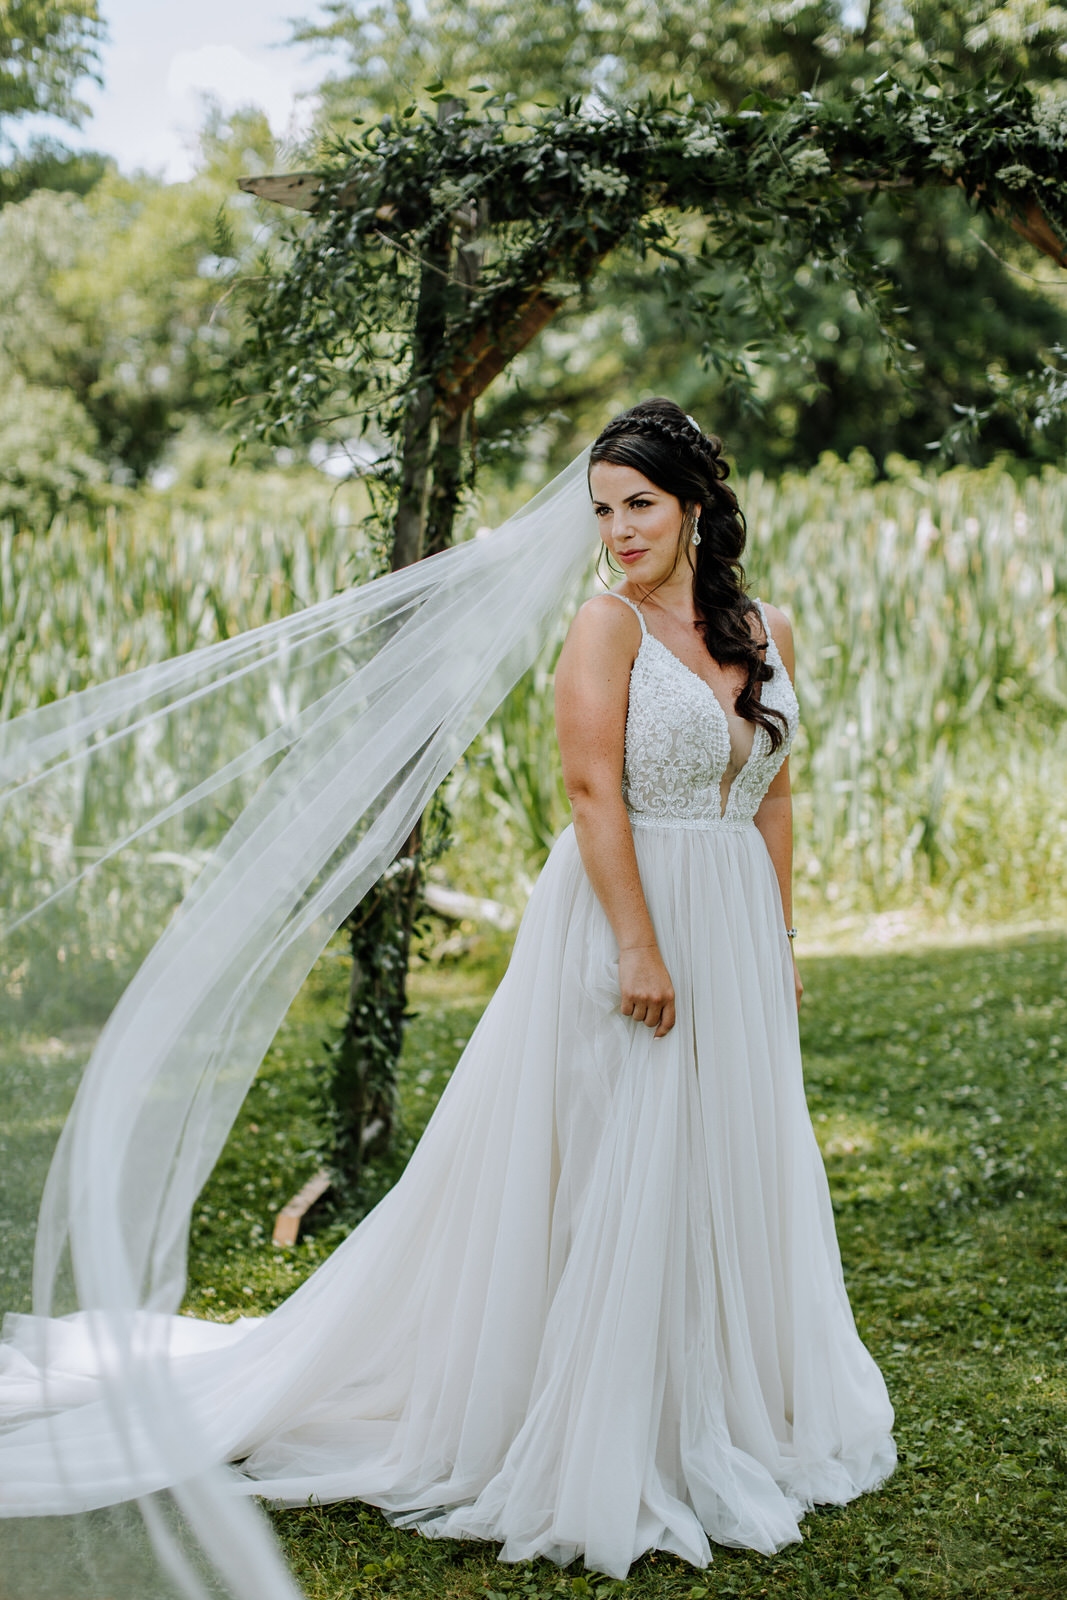 Bridal portrait with veil sweeping in the wind